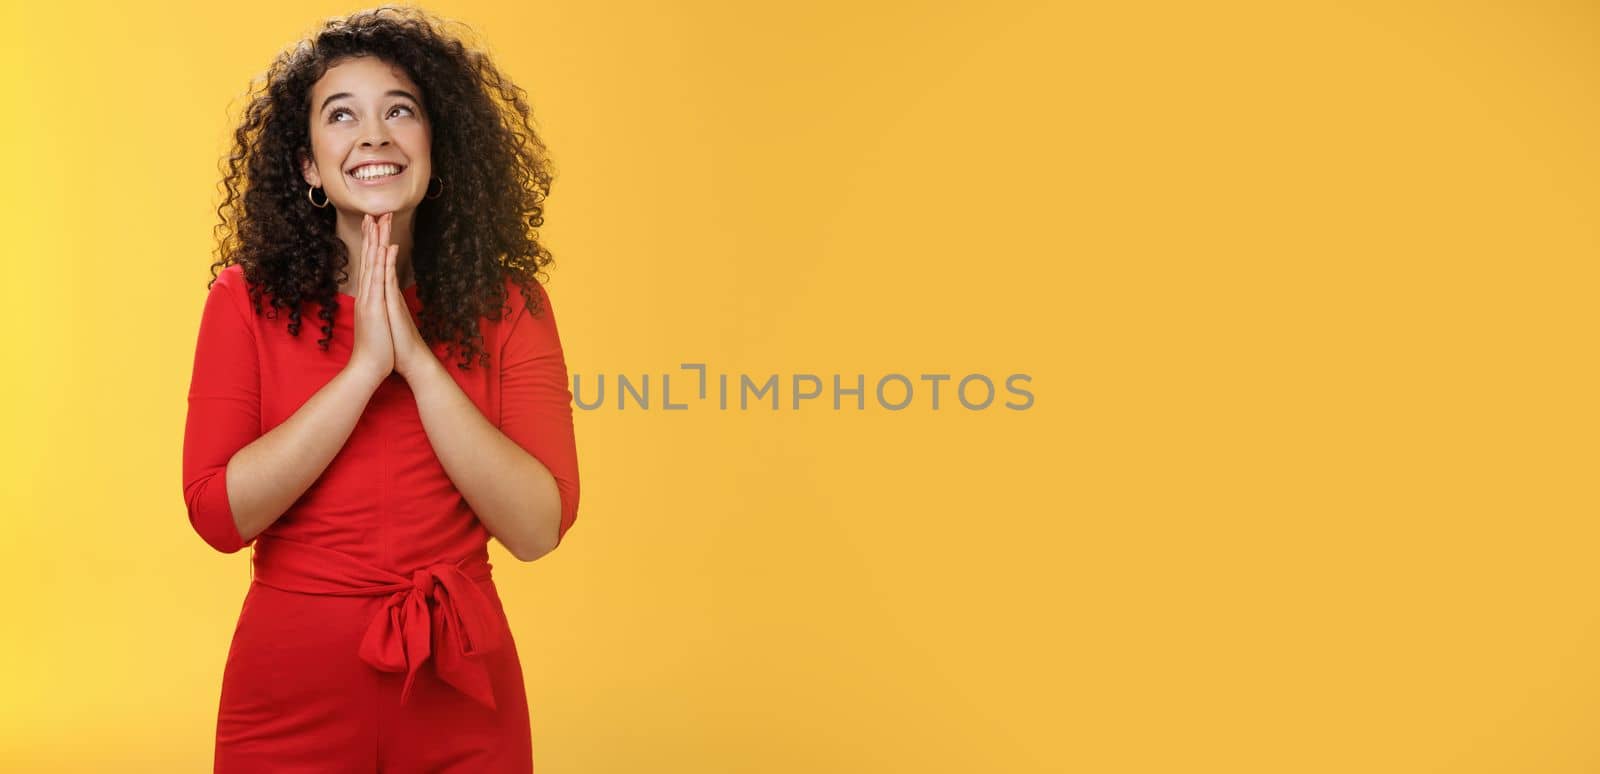 Lifestyle. Dreamy excited cute b-day girl with curly hair in cute red dress rubbing palms together near chest as hands in pray smiling looking up delighted and hopeful making wish over yellow background.